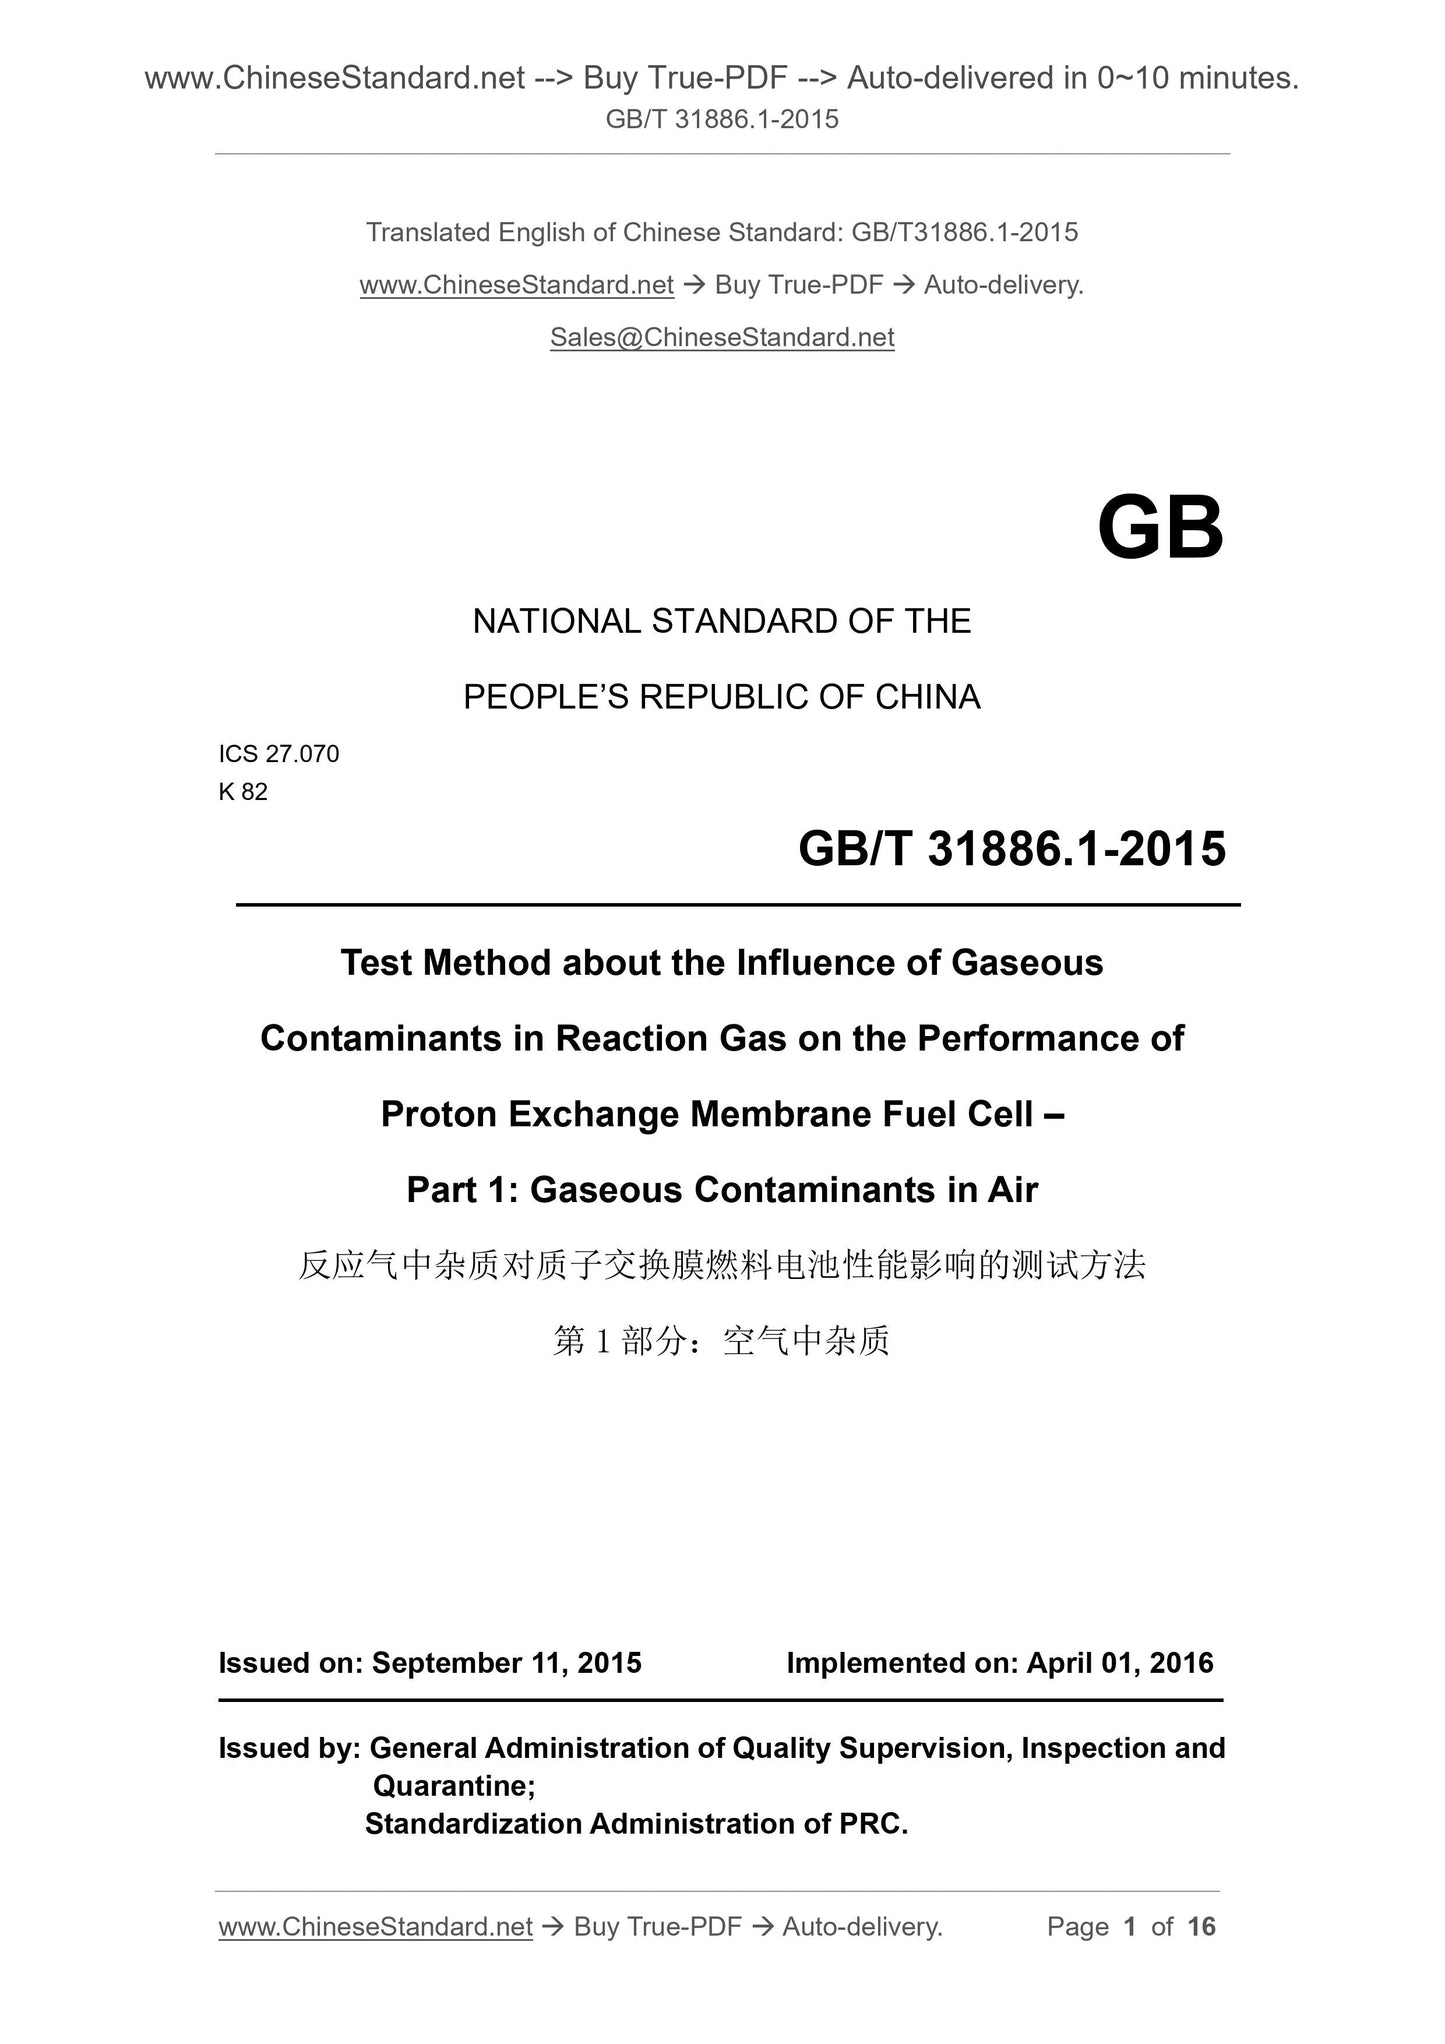 GB/T 31886.1-2015 Page 1